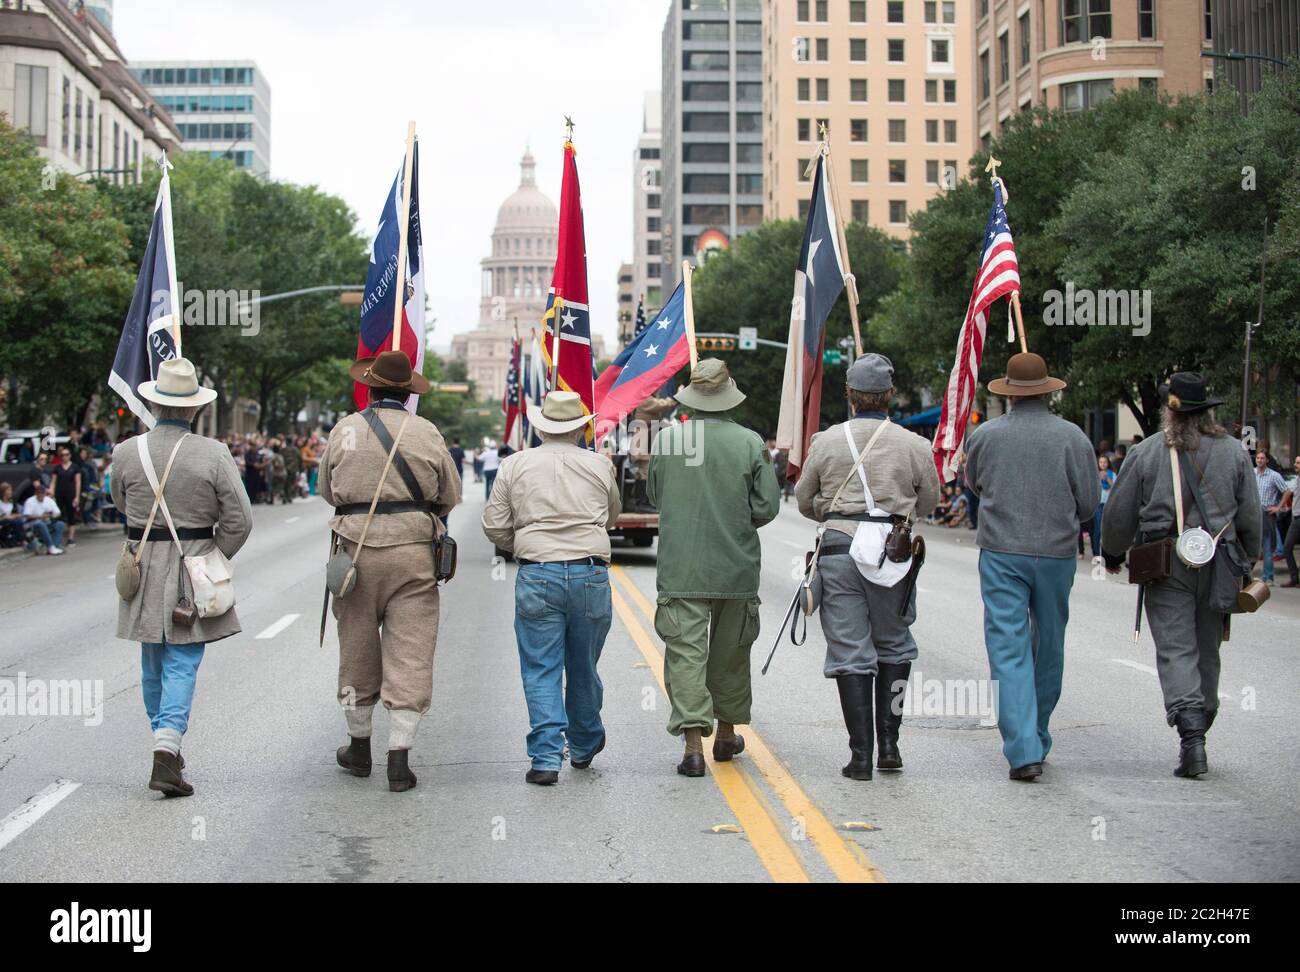 Austin Texas USA, November 11 2015: A group from the Sons of Confederate Veterans display Civil War Confederate battle flags alongside the U.S. flag  during the annual Veterans Day parade up Congress Avenue.   ©Bob Daemmrich Stock Photo